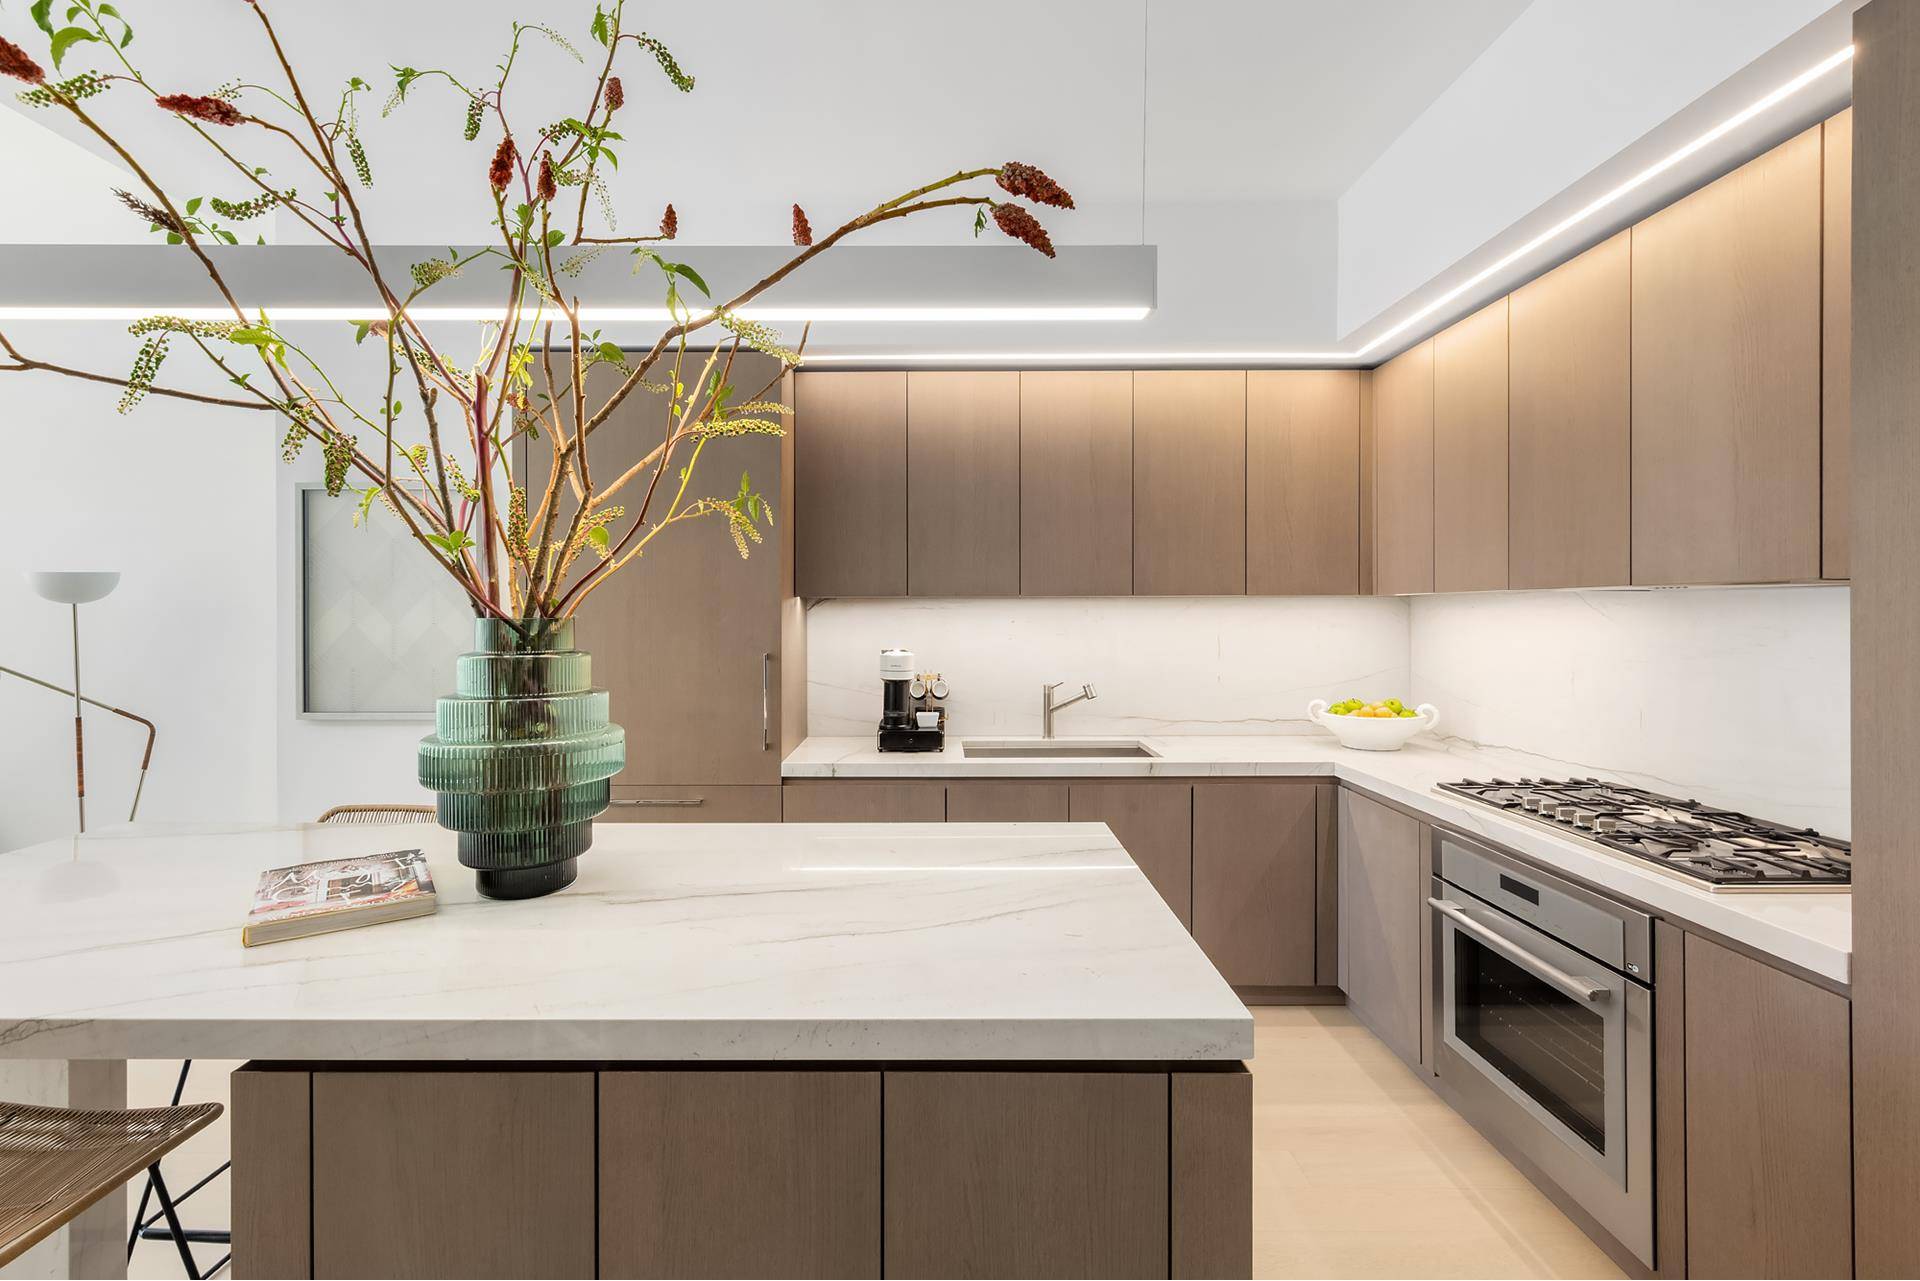 Step into the vibrant and inspired lifestyle of Hudson Square Soho West, nestled in the heart of New York City at the prestigious 77 Charlton luxury property.